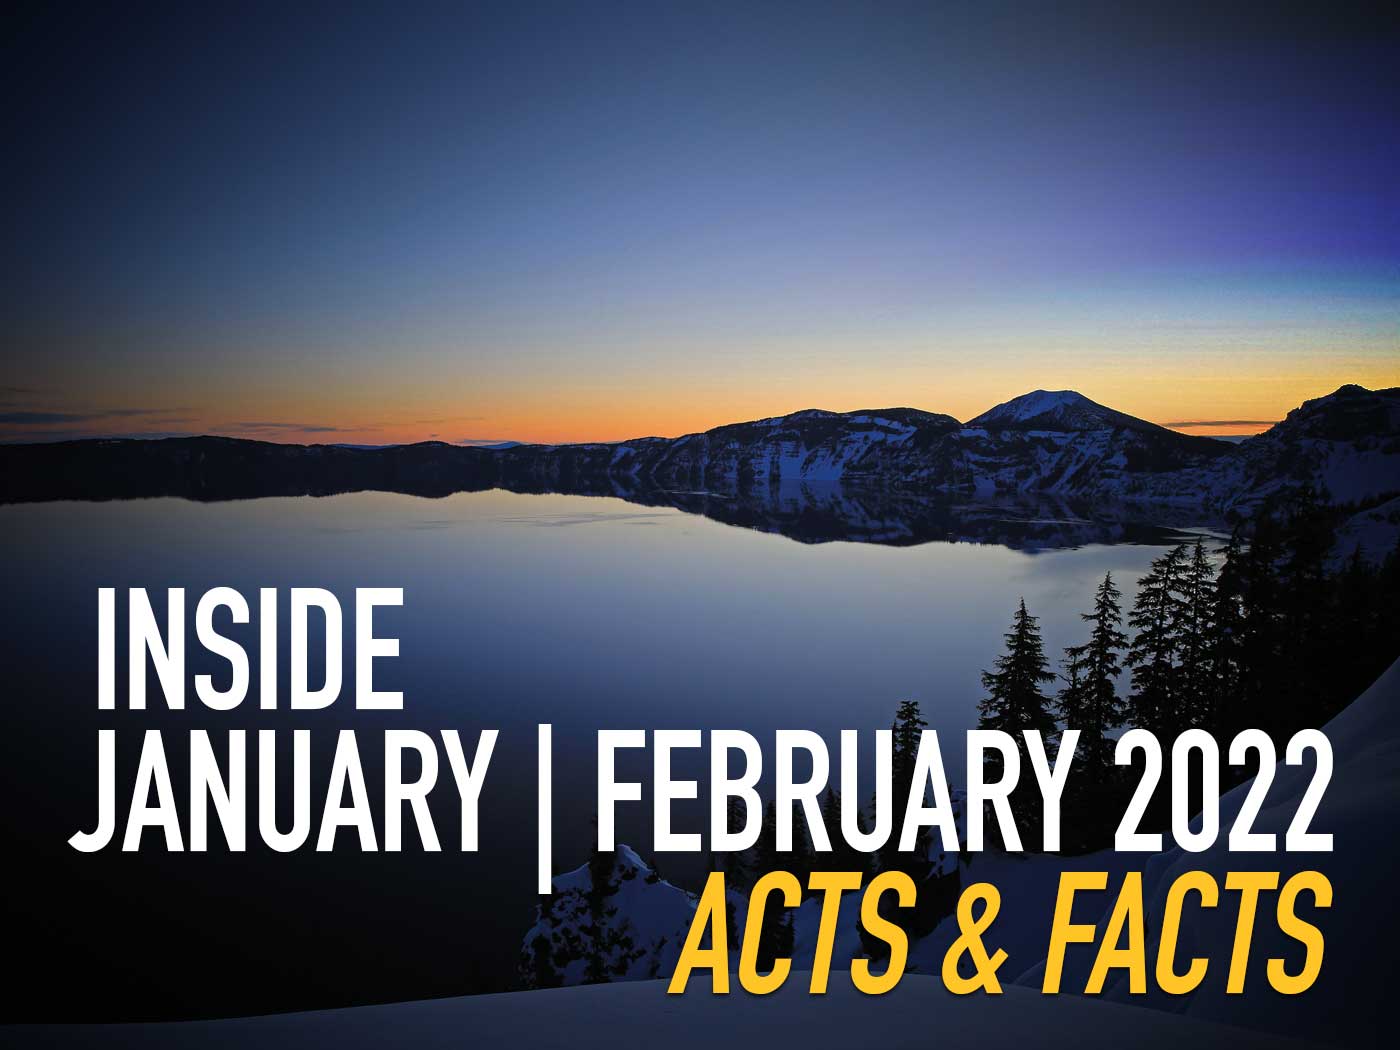 Inside January-February 2022 Acts & Facts